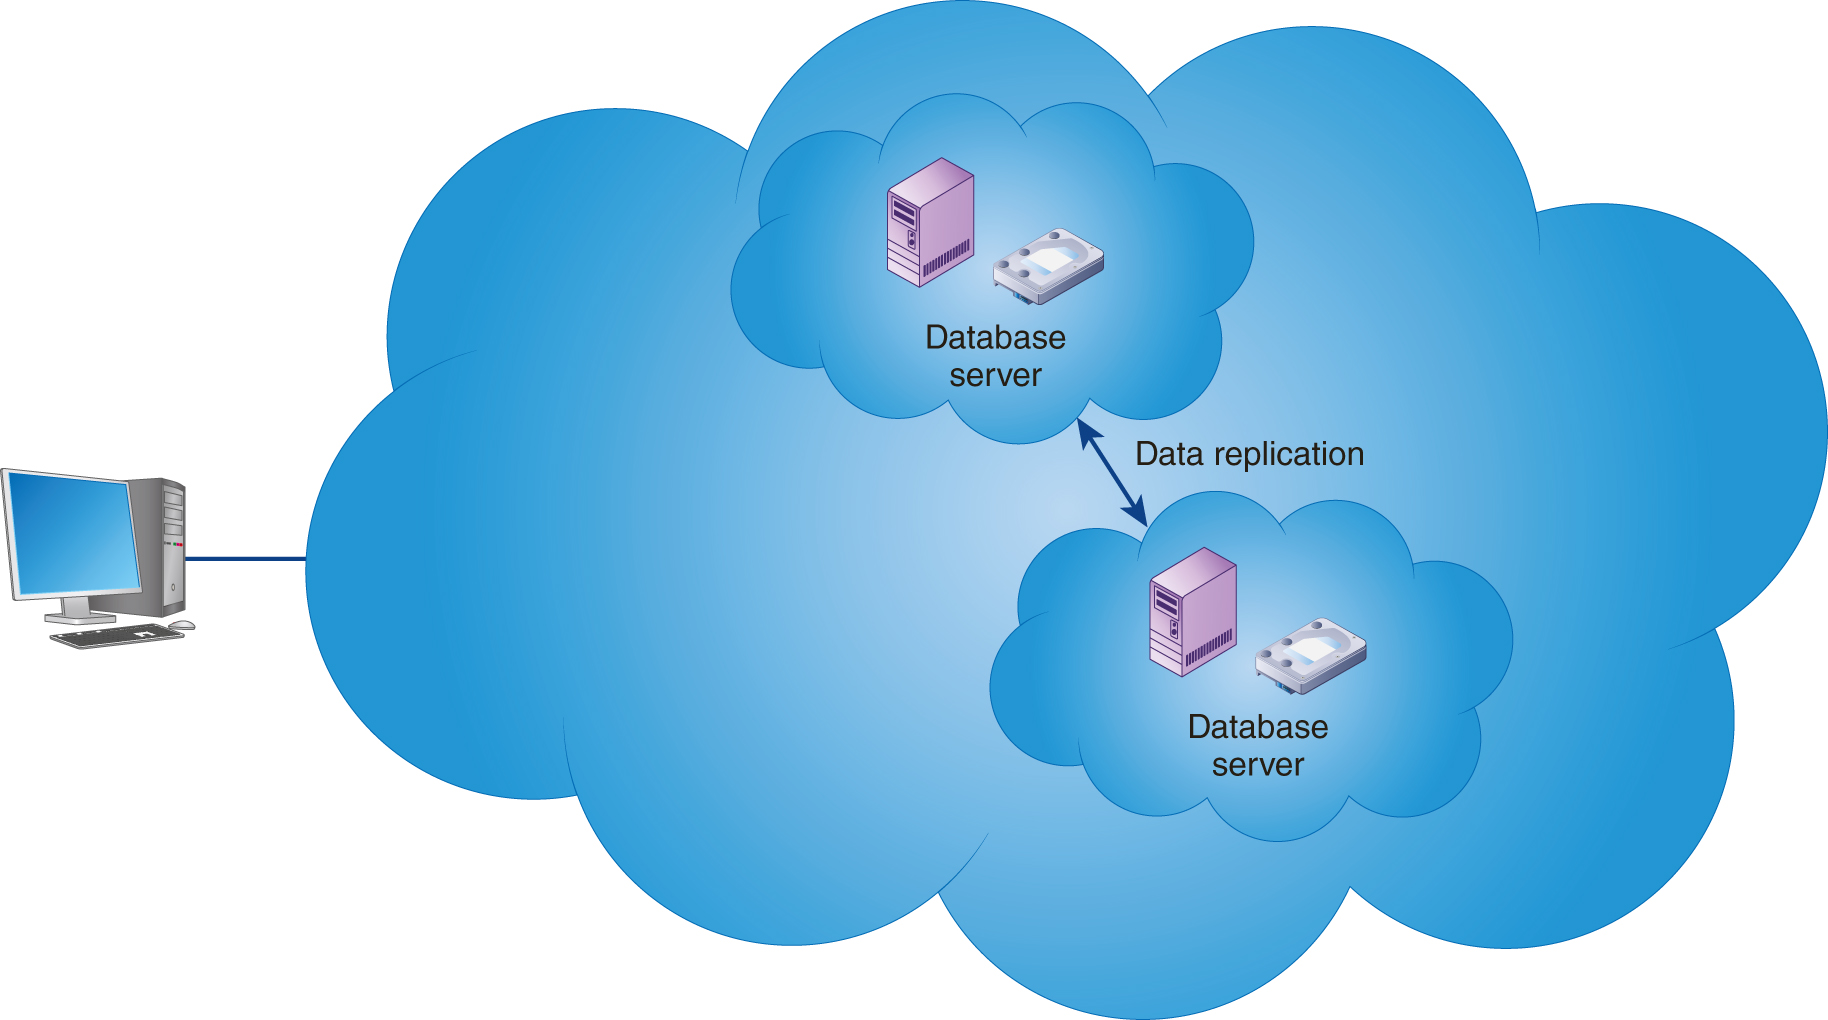 A user connects with a larger cloud consisting of two smaller clouds. A server and a disk in each of the clouds represent database server with an arrow connecting both the clouds representing data replication.